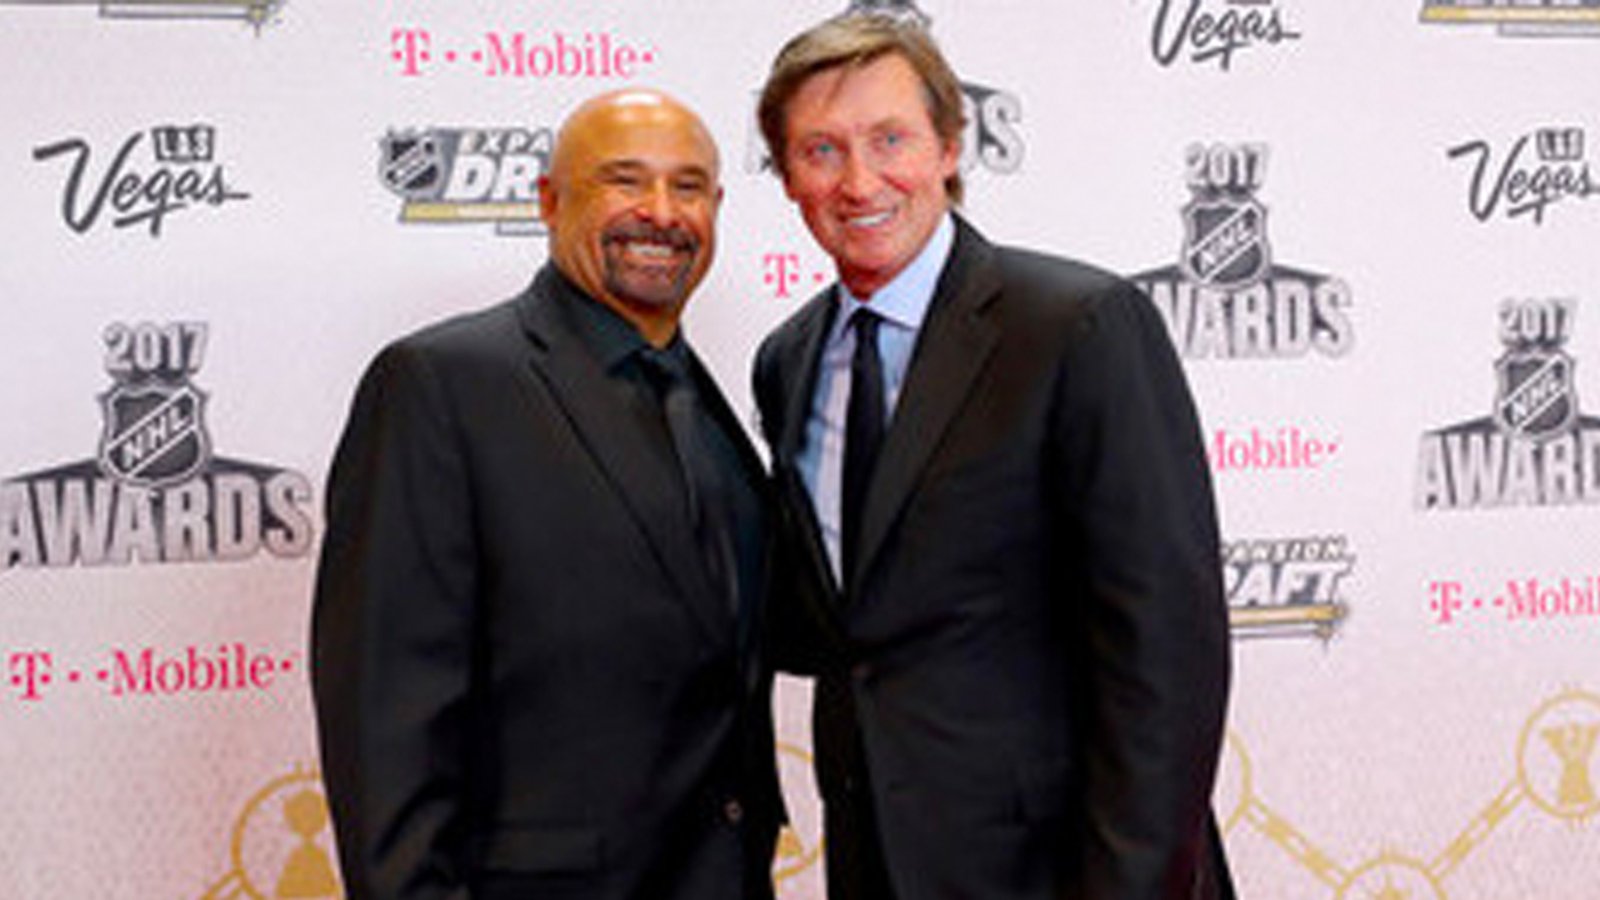 Wayne Gretzky gets awkwardly insulted by former teammate Furh’s foundation 